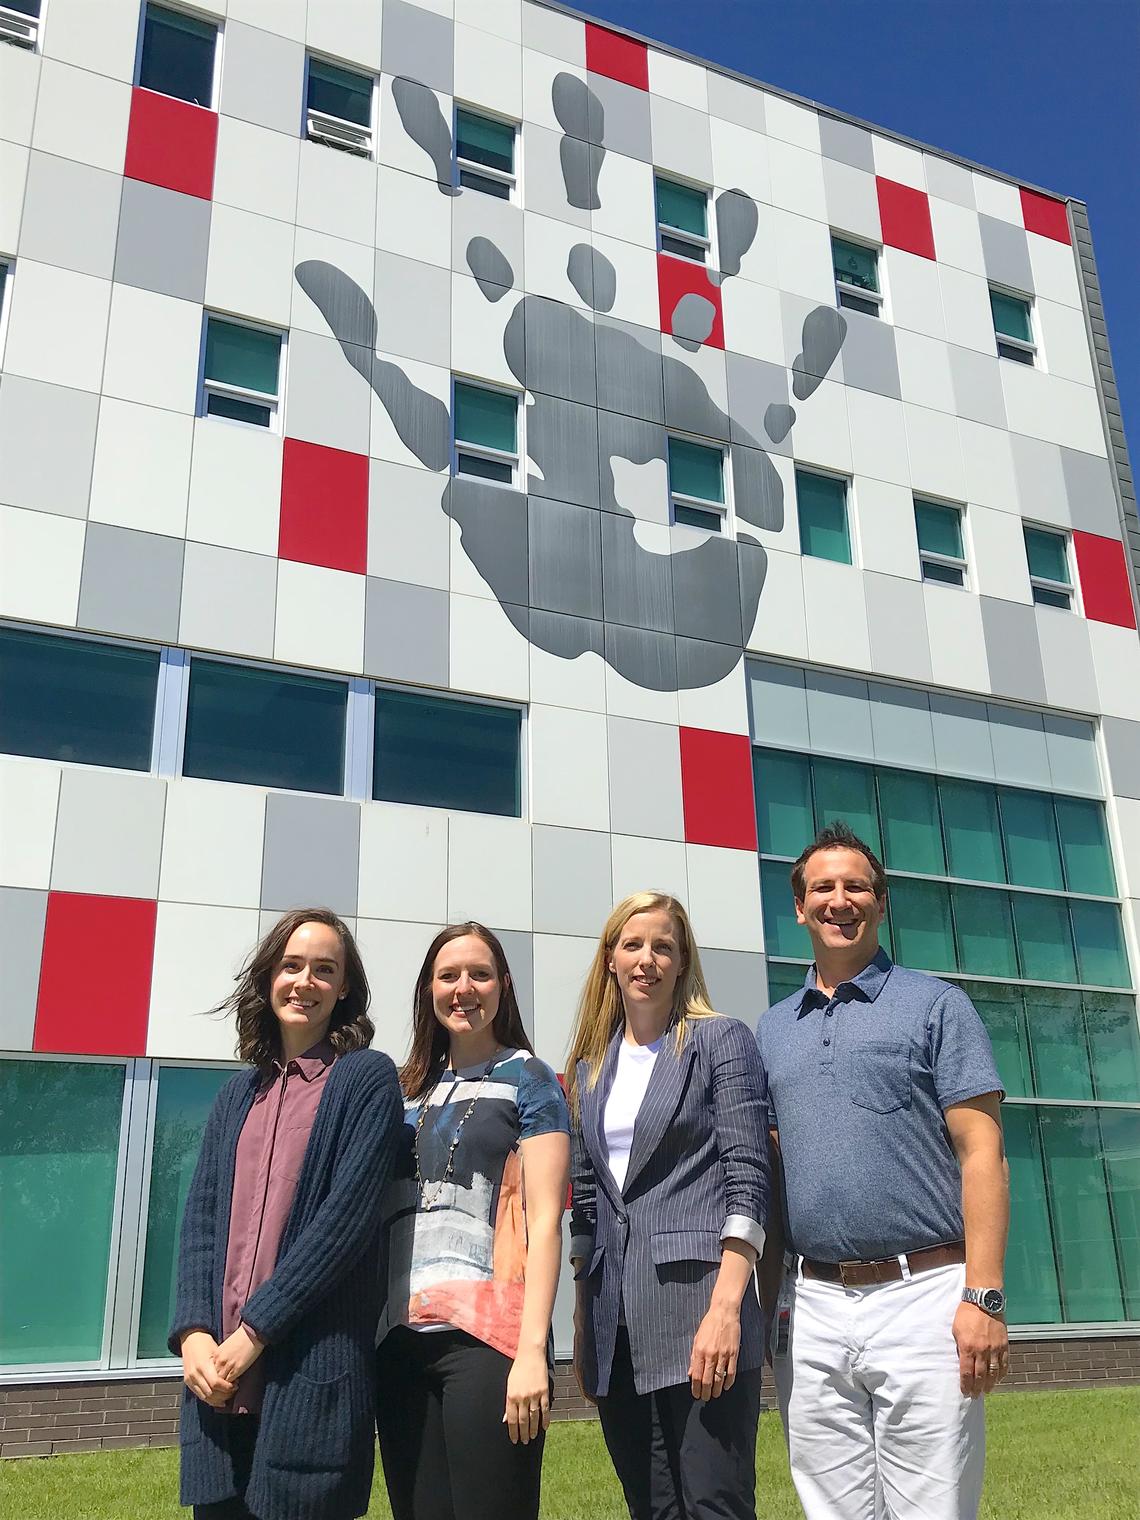 Rachel Eirich, far left, values being a part of a collaborative project, where the goal is to better the lives of children who have endured trauma. With her, from left: Nicole Racine, Sheri Madigan, and Daniel Garfinkle.